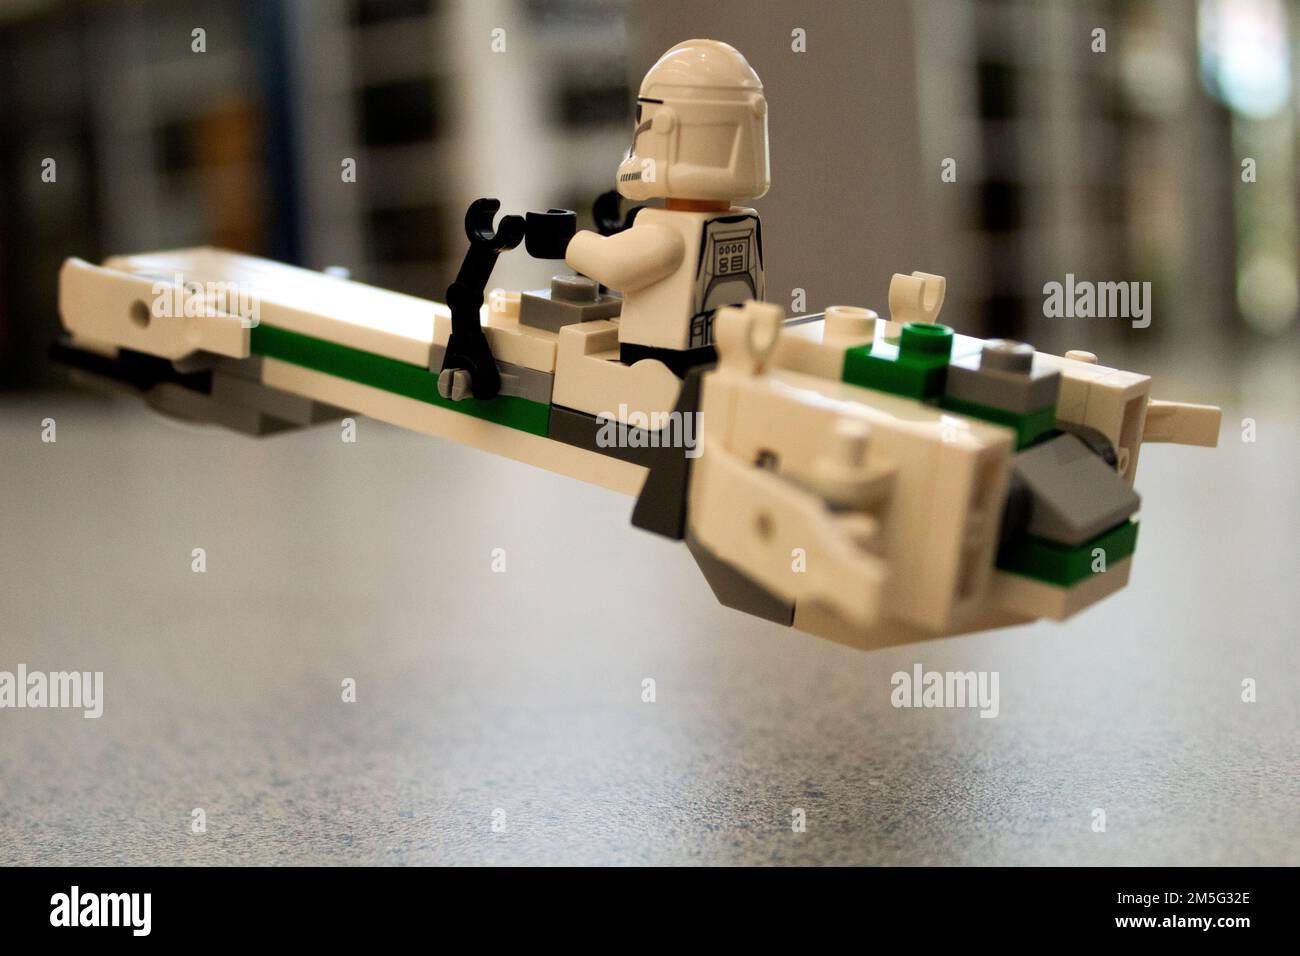 Toy Lego Star Wars Flying Storm Trooper Stock Photo